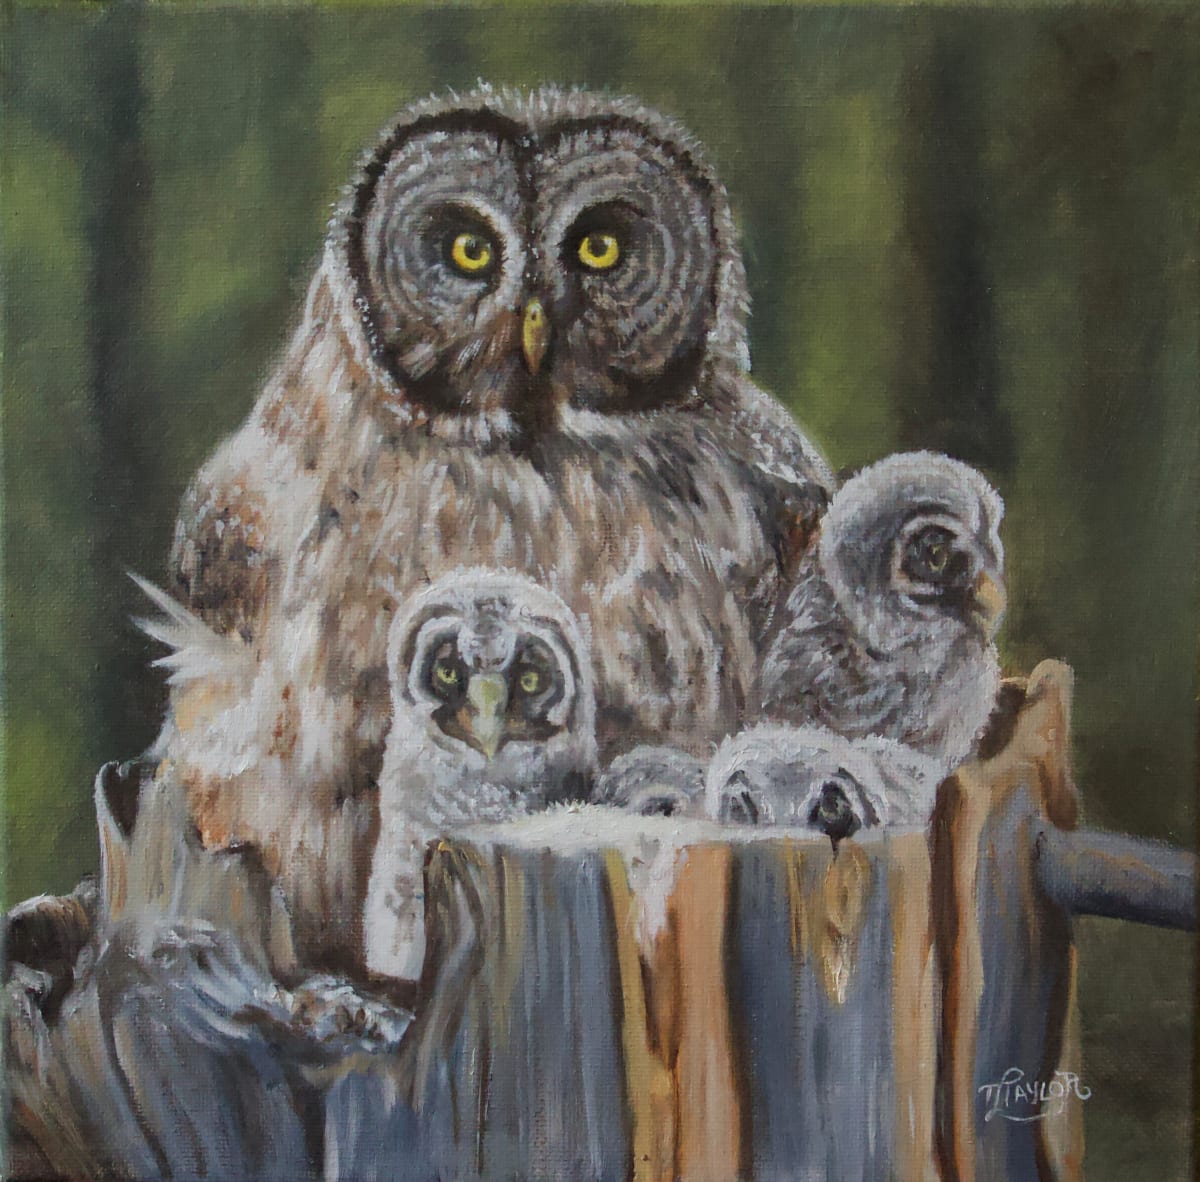 The Owl Family by Tammy Taylor 